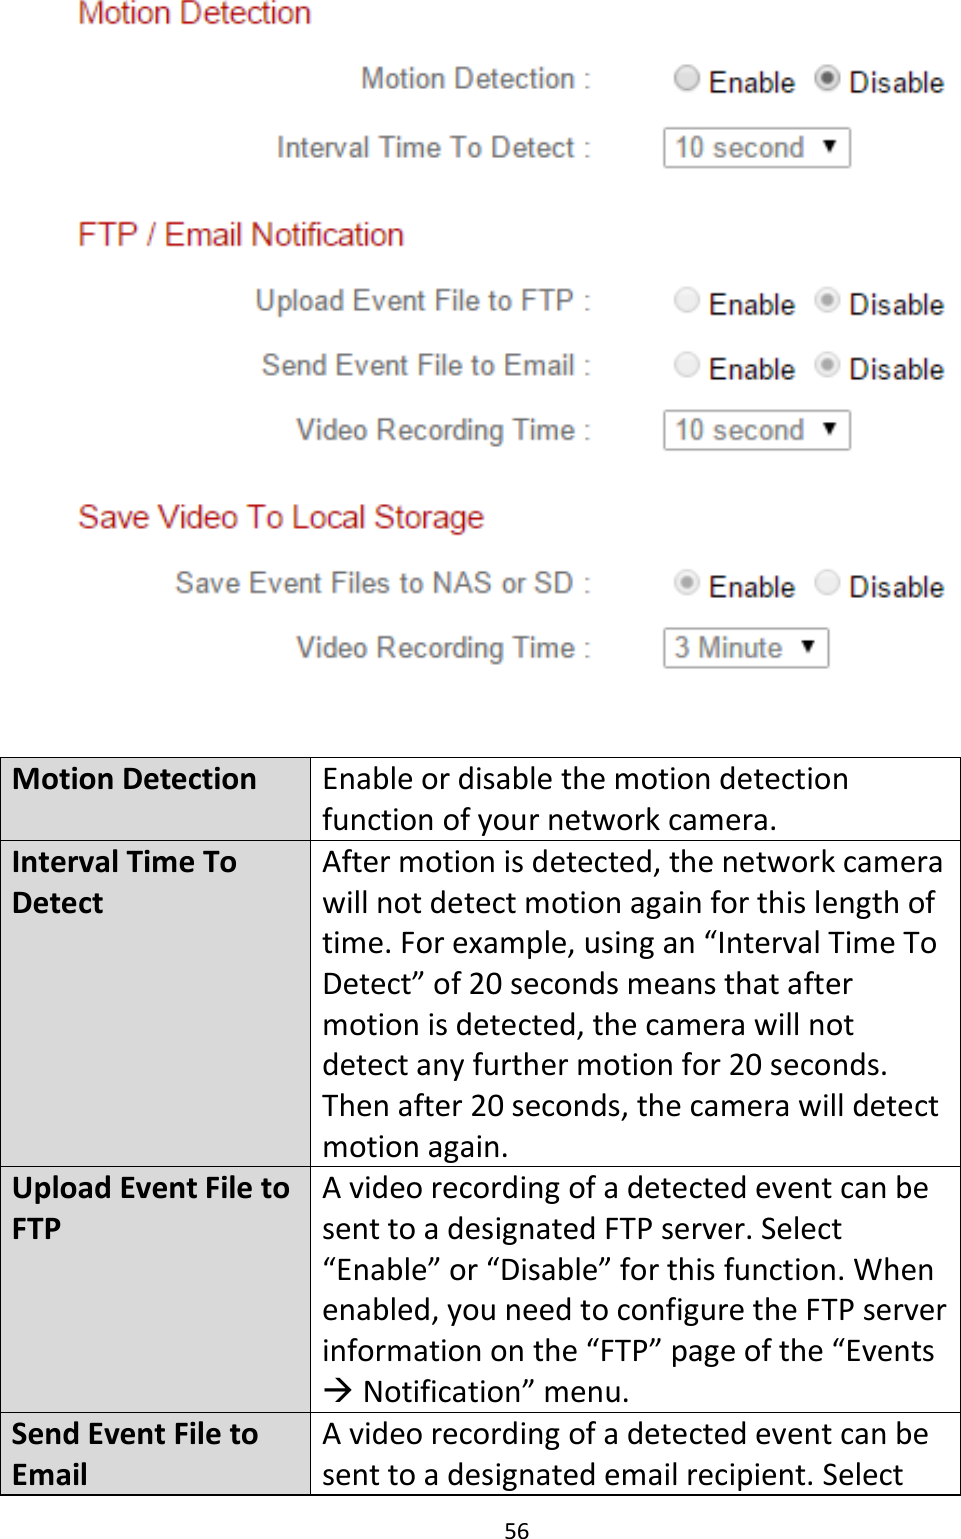 56    Motion Detection Enable or disable the motion detection function of your network camera. Interval Time To Detect After motion is detected, the network camera will not detect motion again for this length of time. For example, using an “Interval Time To Detect” of 20 seconds means that after motion is detected, the camera will not detect any further motion for 20 seconds. Then after 20 seconds, the camera will detect motion again. Upload Event File to FTP A video recording of a detected event can be sent to a designated FTP server. Select “Enable” or “Disable” for this function. When enabled, you need to configure the FTP server information on the “FTP” page of the “Events  Notification” menu. Send Event File to Email A video recording of a detected event can be sent to a designated email recipient. Select 